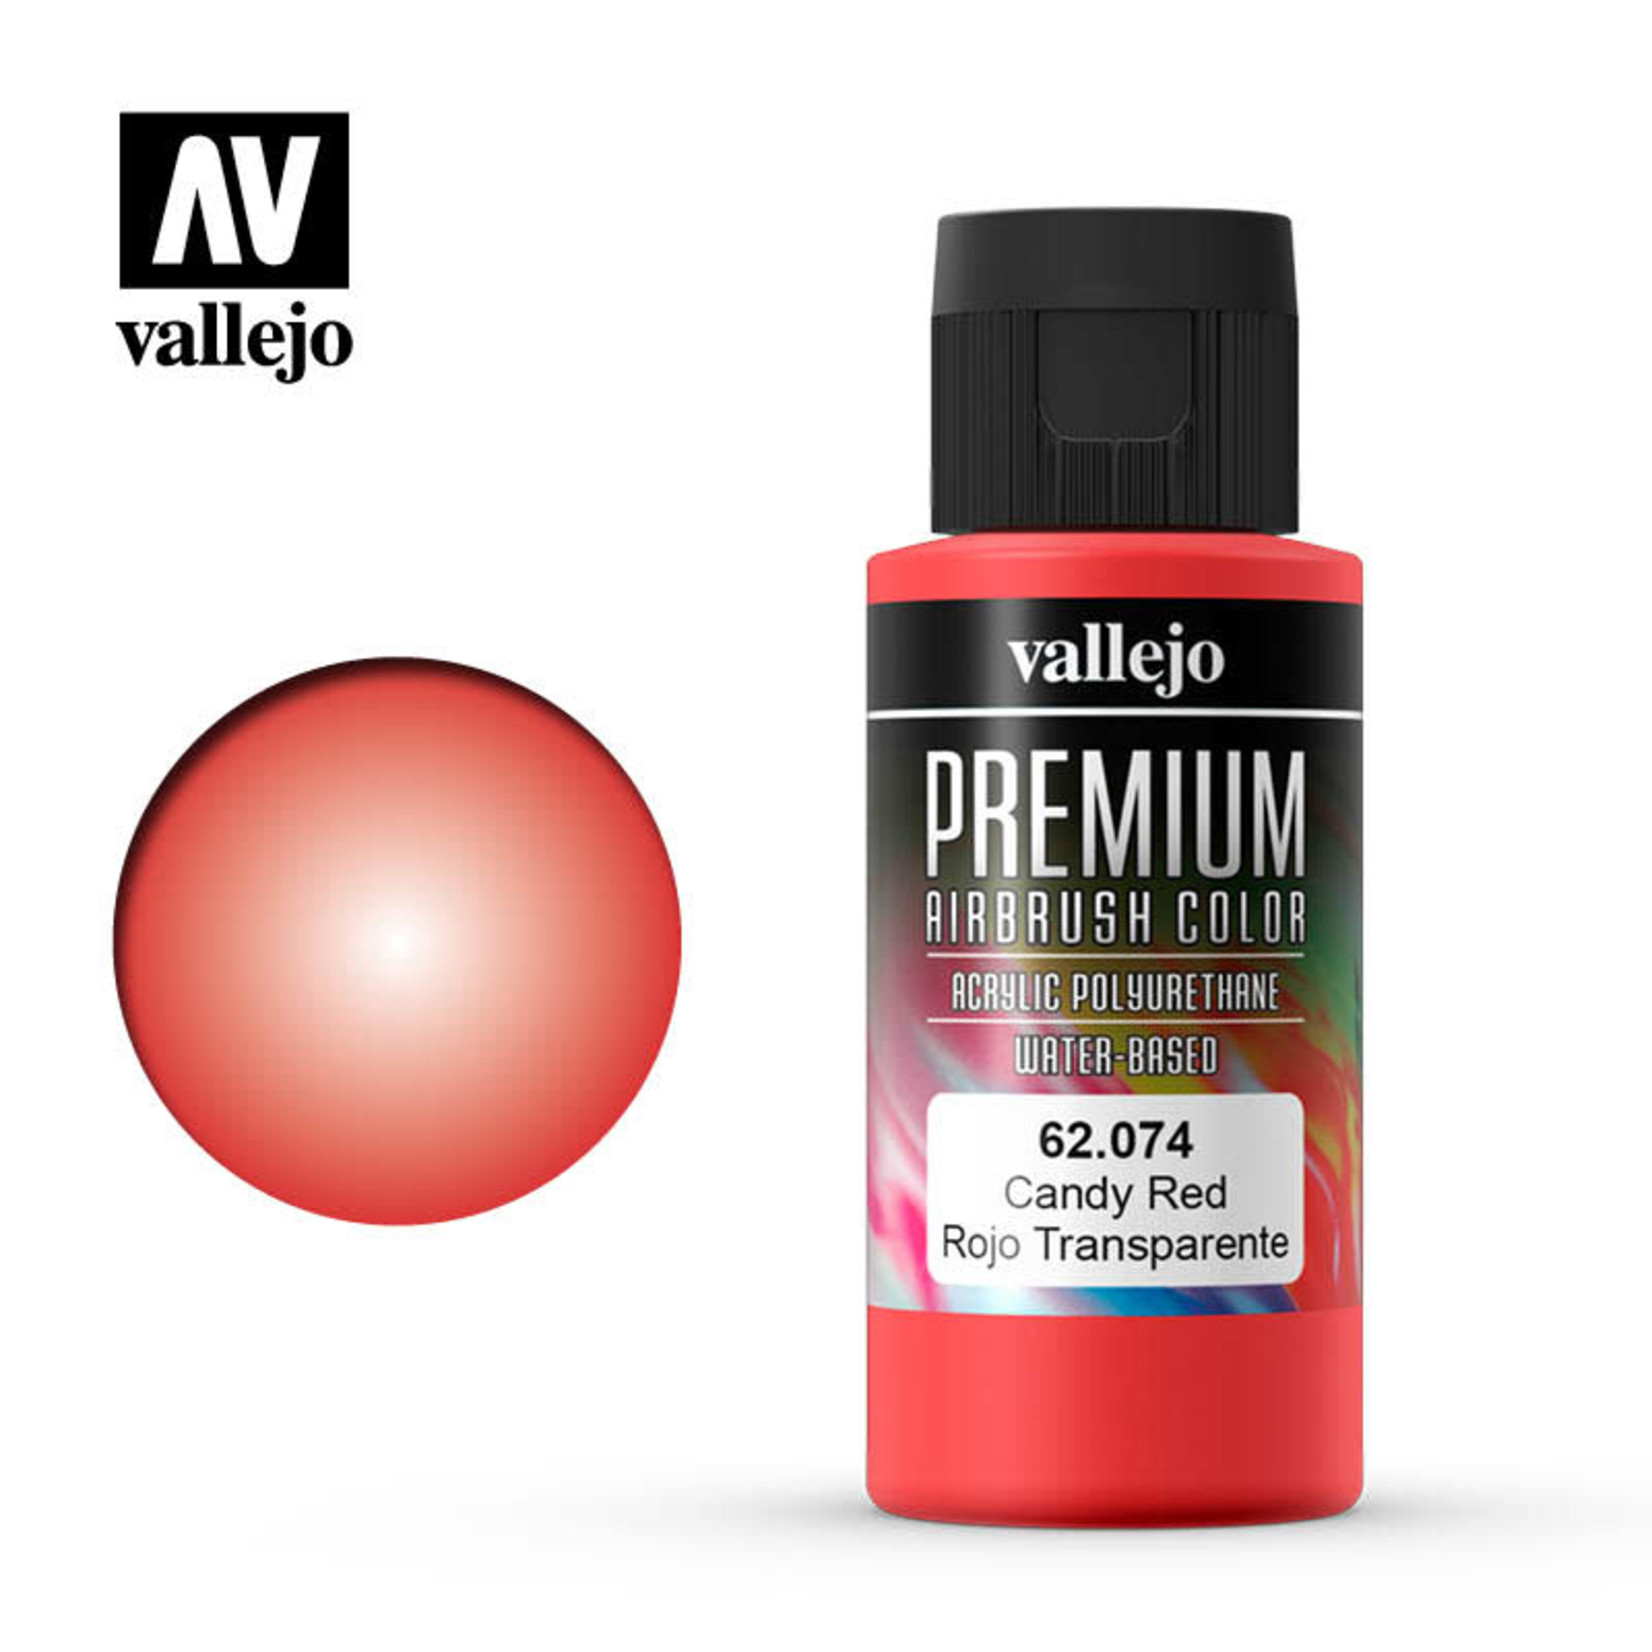 Vallejo VAL62074 Premium Airbrush Color Candy Red (60ml)